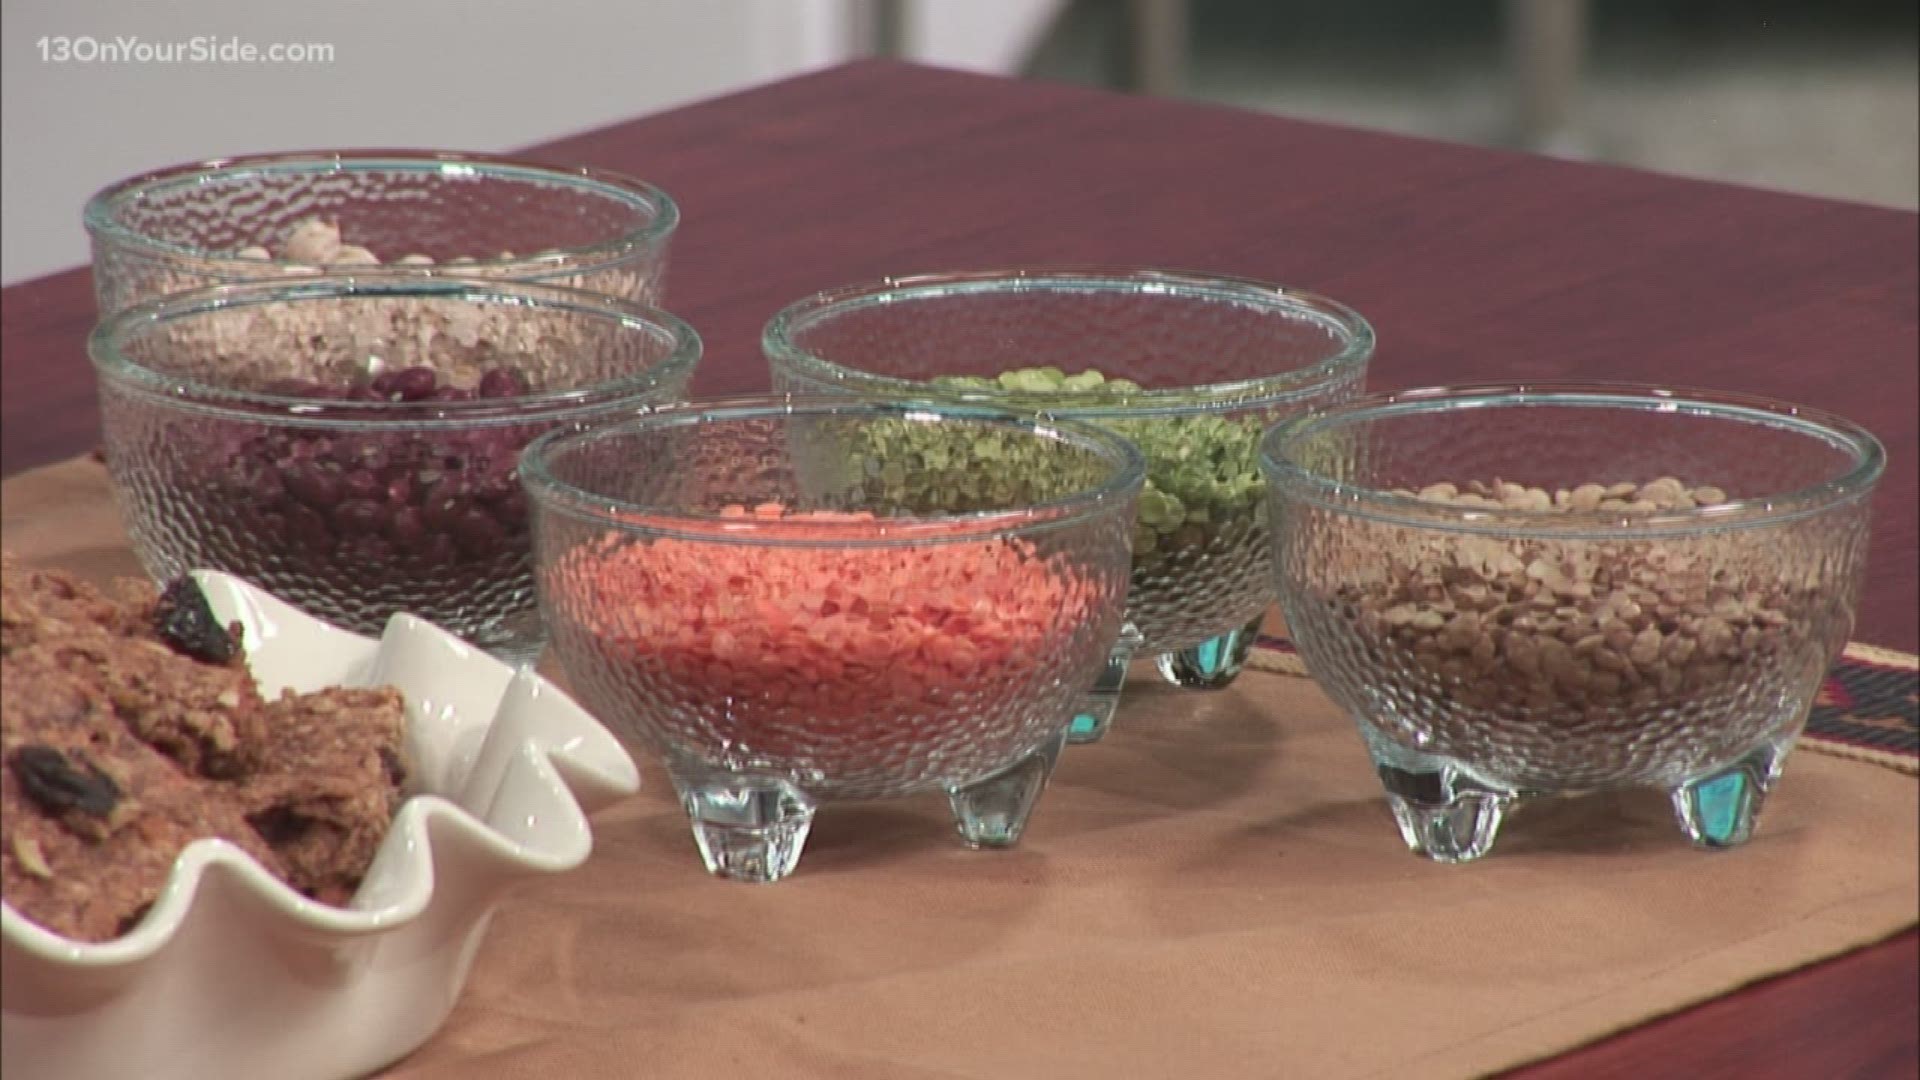 Mercy Health Registered Dietitian Tara Martin shares recipes featuring some small, but mighty plants.